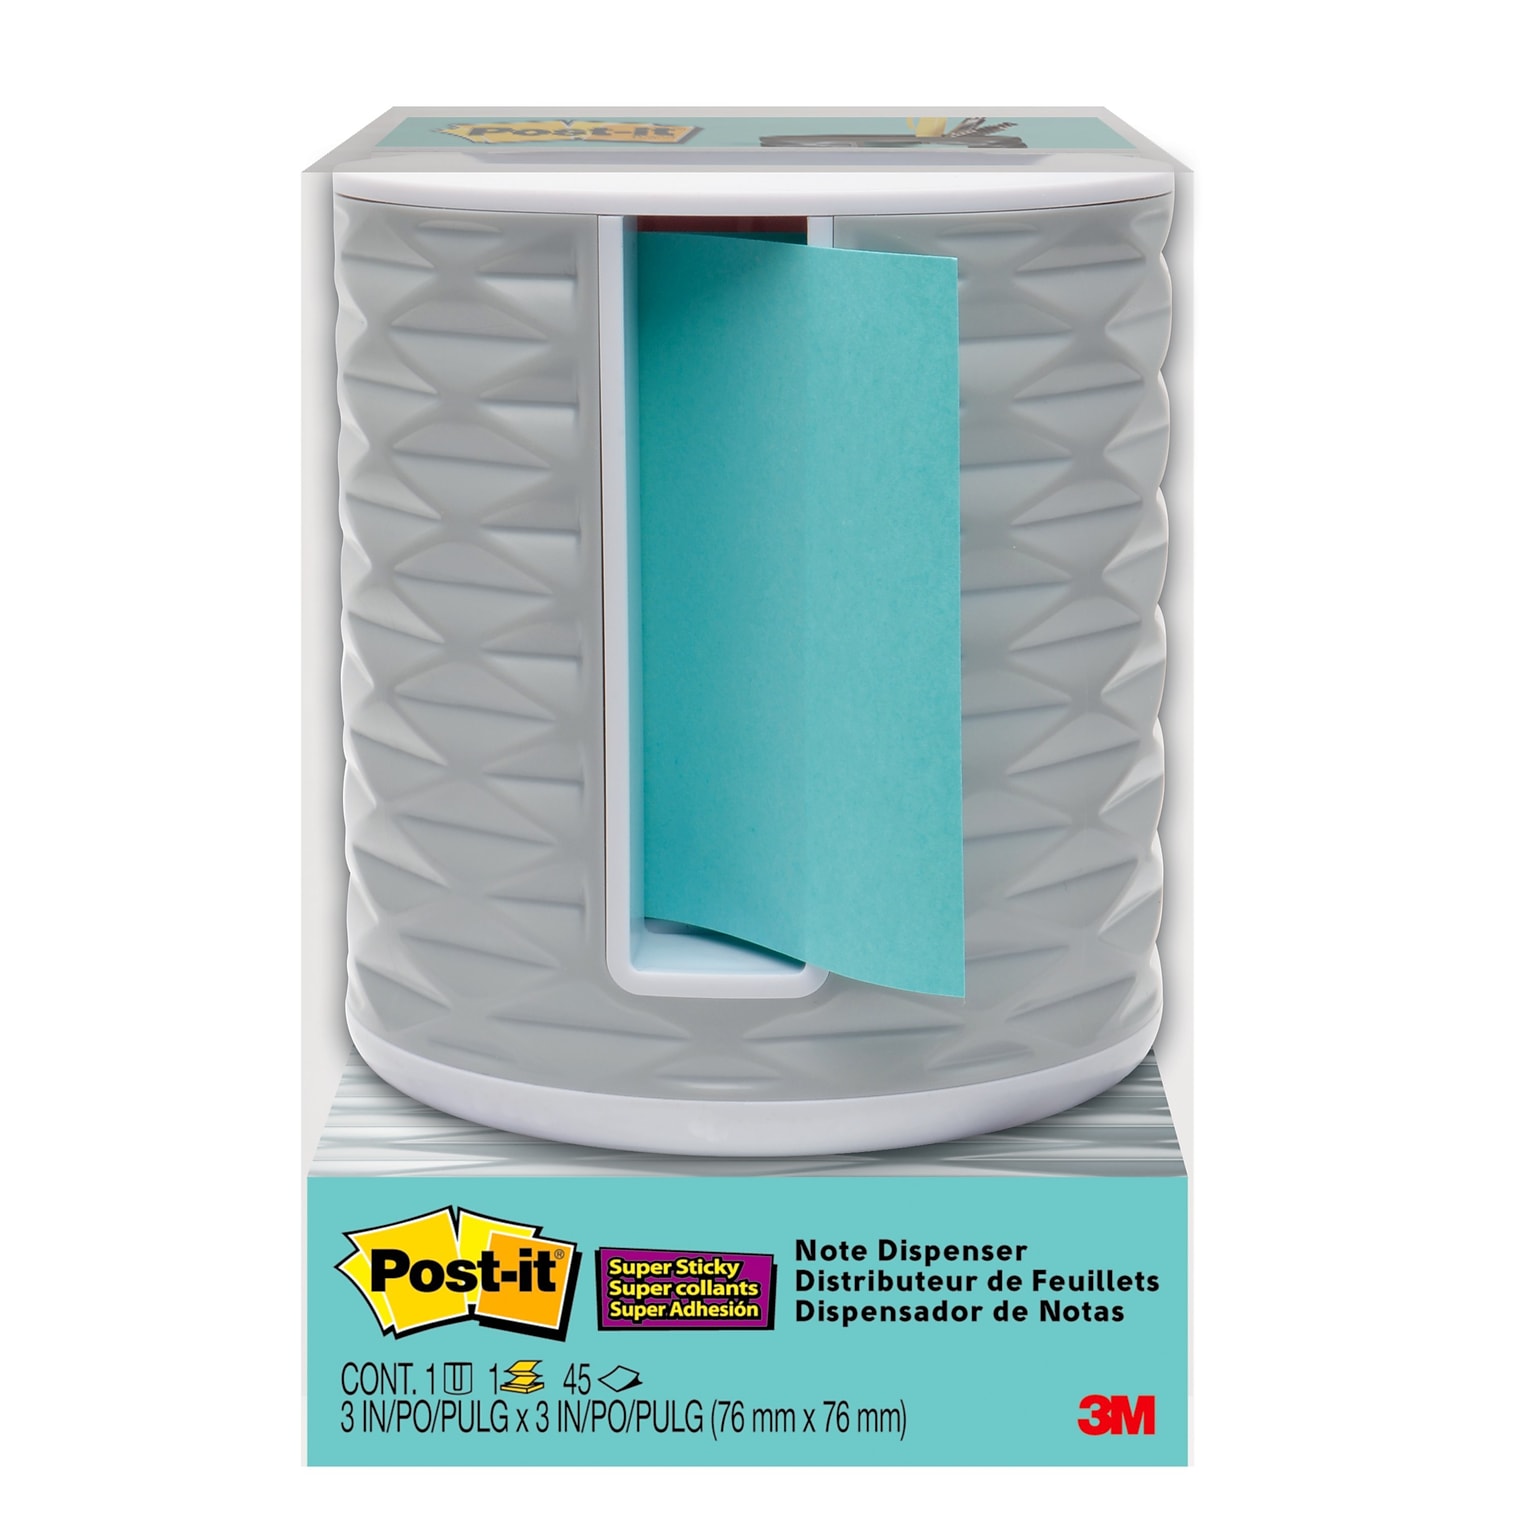 Post-it® Note Dispenser for 3 x 3 Pop-Up Notes, White/Grey (ABS-330-W)